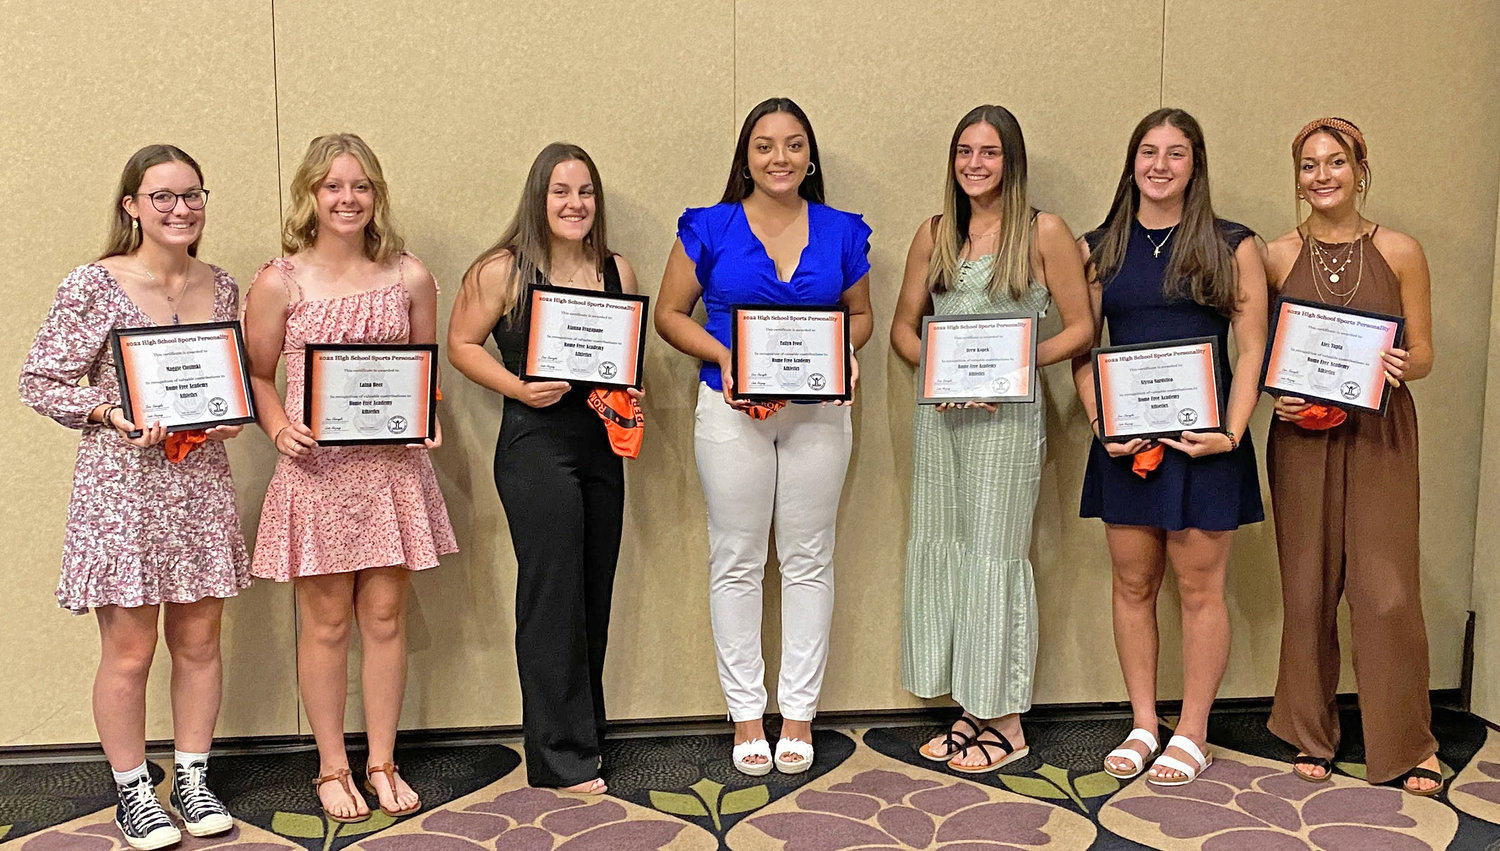 FEMALE SPORTS PERSONALTIES — The 12 Rome Free Academy honorees as High School Female Sports Personalities this year by the Rome Sports Hall of Fame are, from left: Maggie Closinski, Laina Beer, Alanna Fragapane, Tailyn Frost, Drew Kopek, Alyssa Nardslico and Alex Tapia. Not pictured, Lauren Dorfman, Lily Gilroy, Alexis Kennedy, MacKenzie Pantola and Imani Pugh.